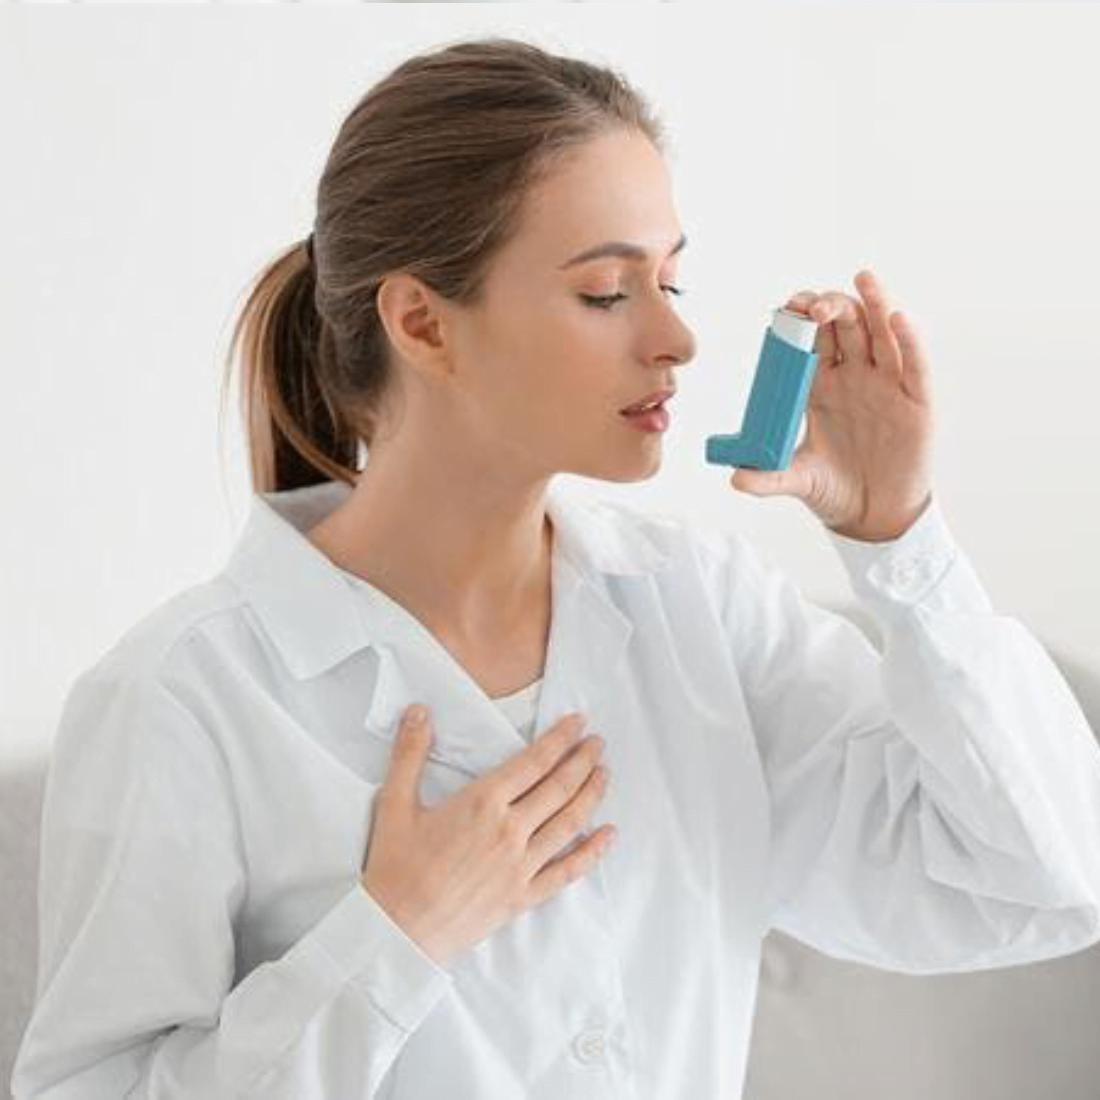 Asthma and Allergy Treatment | Doctor With Inhaler